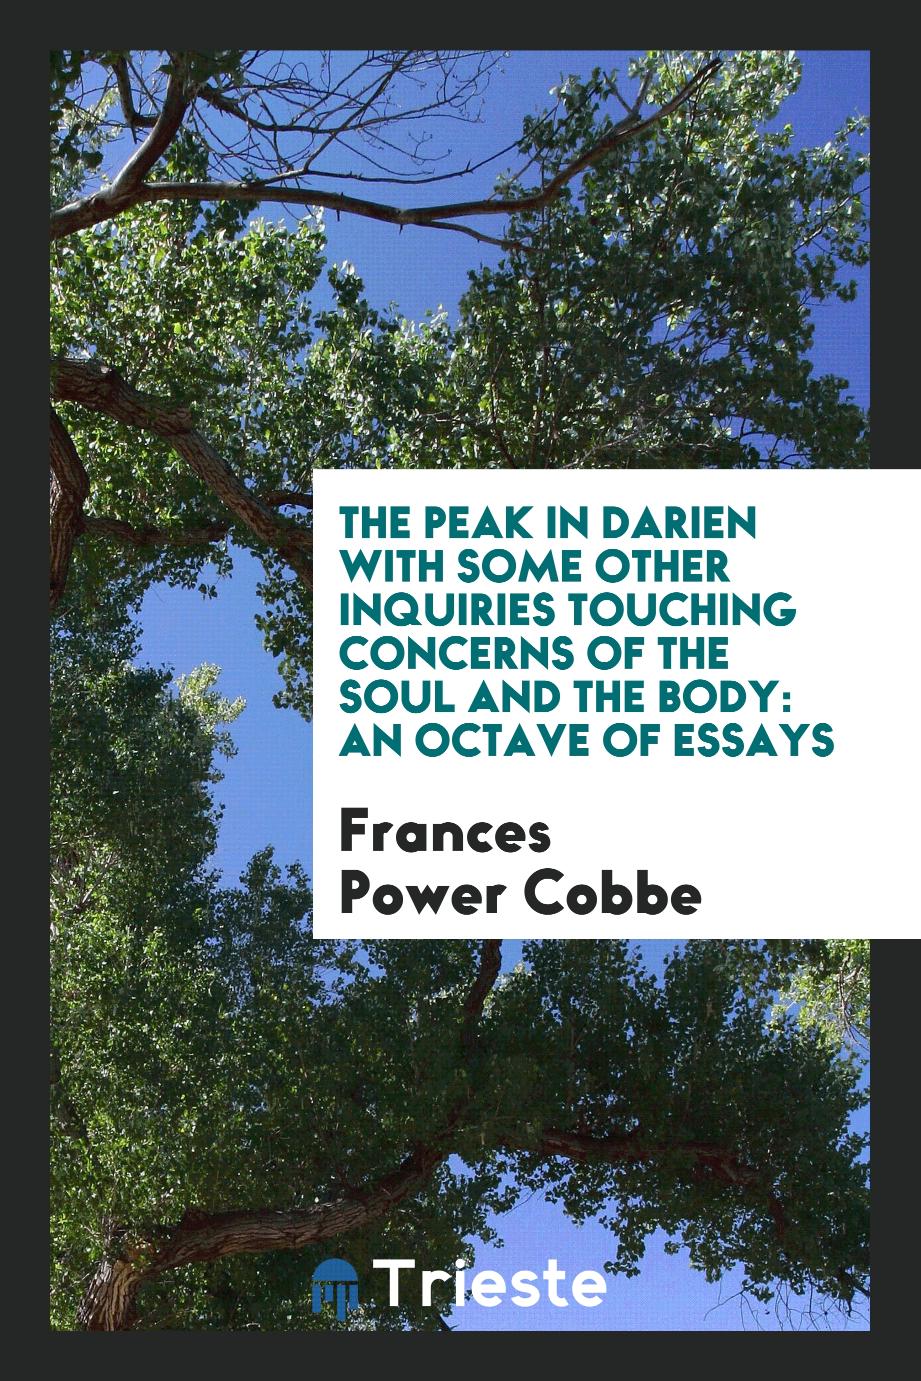 The peak in Darien with some other inquiries touching concerns of the soul and the body: an octave of essays